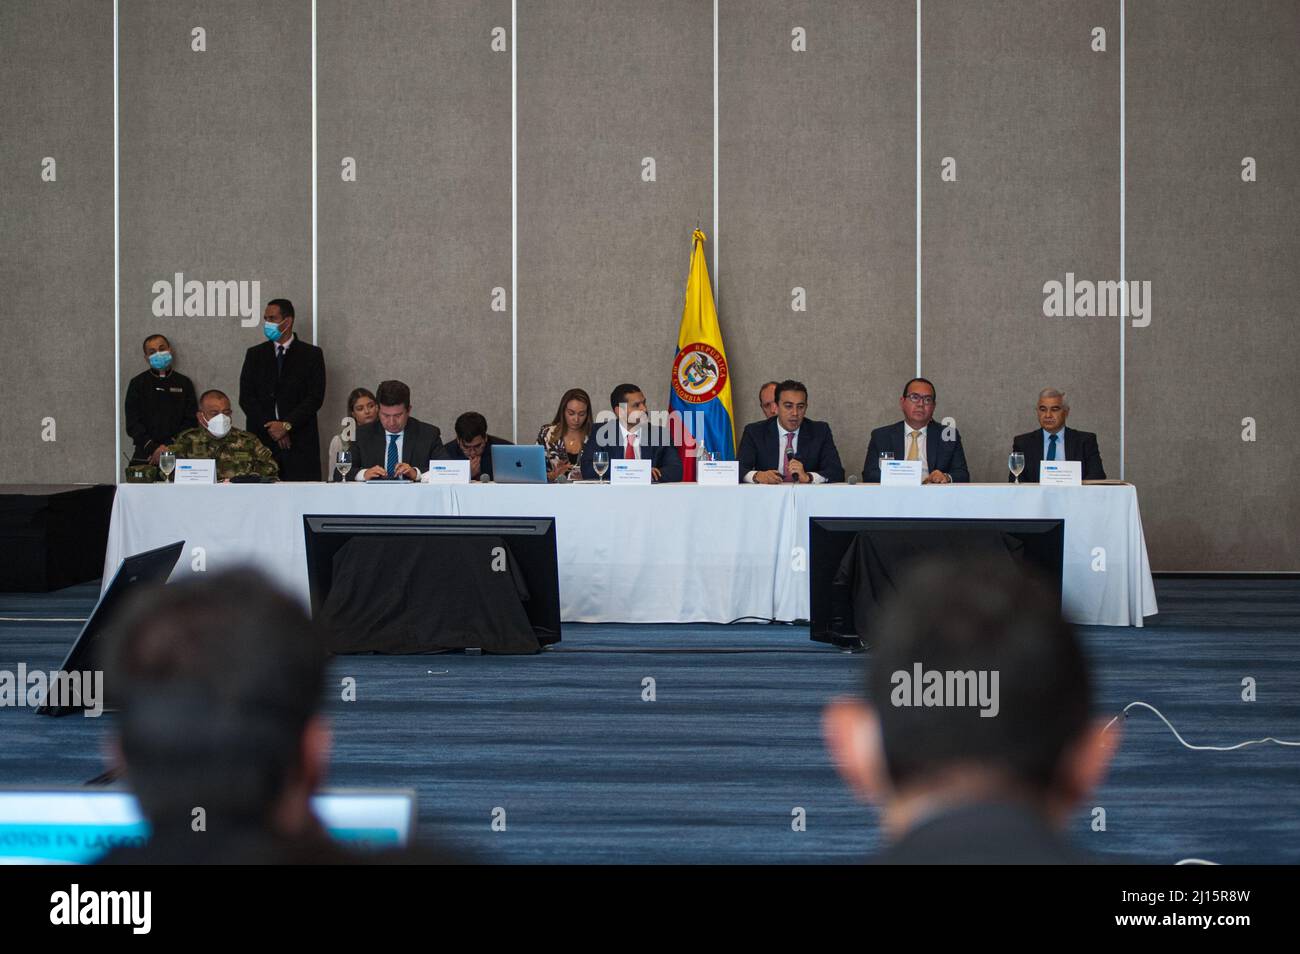 Bogota, Colombia. 22nd Mar, 2022. (Left to right) Army general Luis Fernando Navarro, Minister of Defense Diego Molano, Minister of the Interior Daniel Palacios and national registrar of Colombia Alexander Vega during a meeting of electoral guarantees where national registrar Alexander Vega opted not to do a new election count for the 2022 congressional elections, in Bogota, Colombia March 22, 2022. Photo by: Chepa Beltran/Long Visual Press Credit: Long Visual Press/Alamy Live News Stock Photo